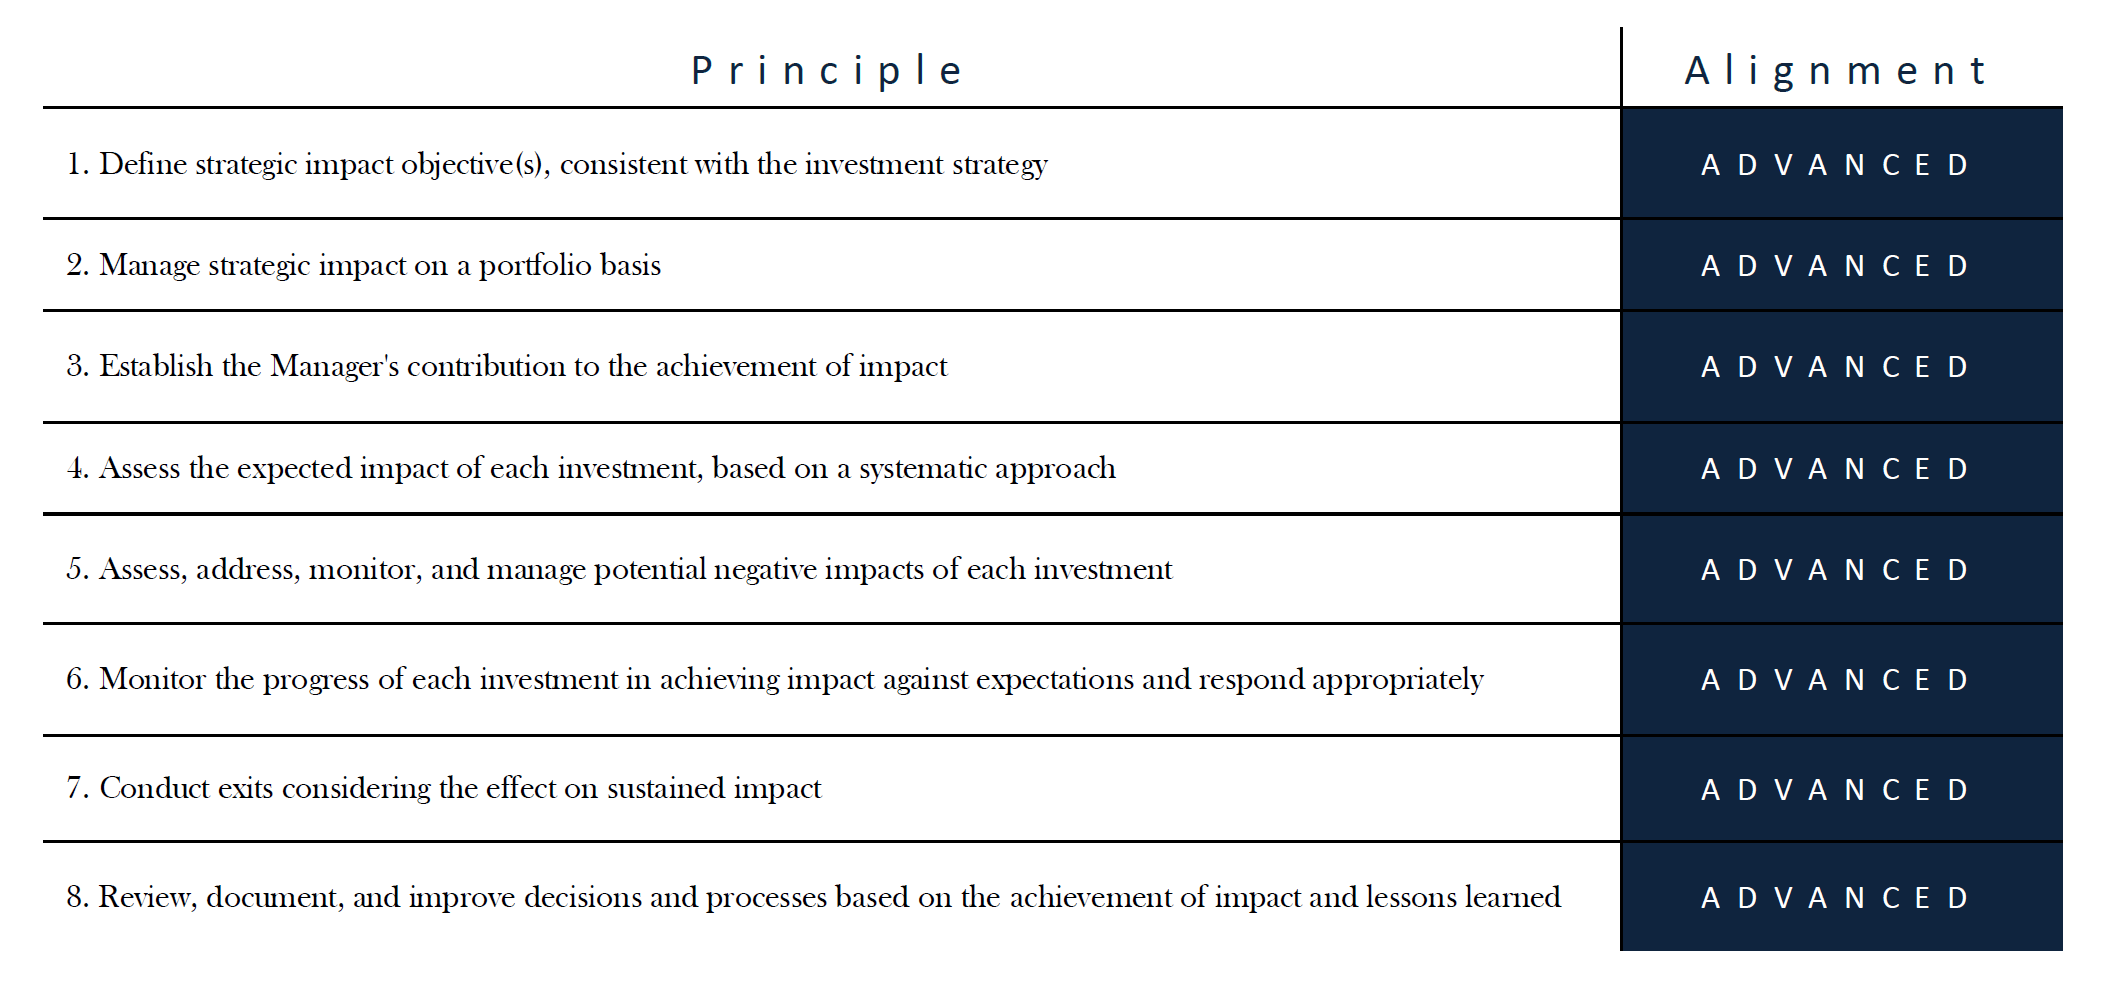 Principles alignment from 2023 verifiers statement